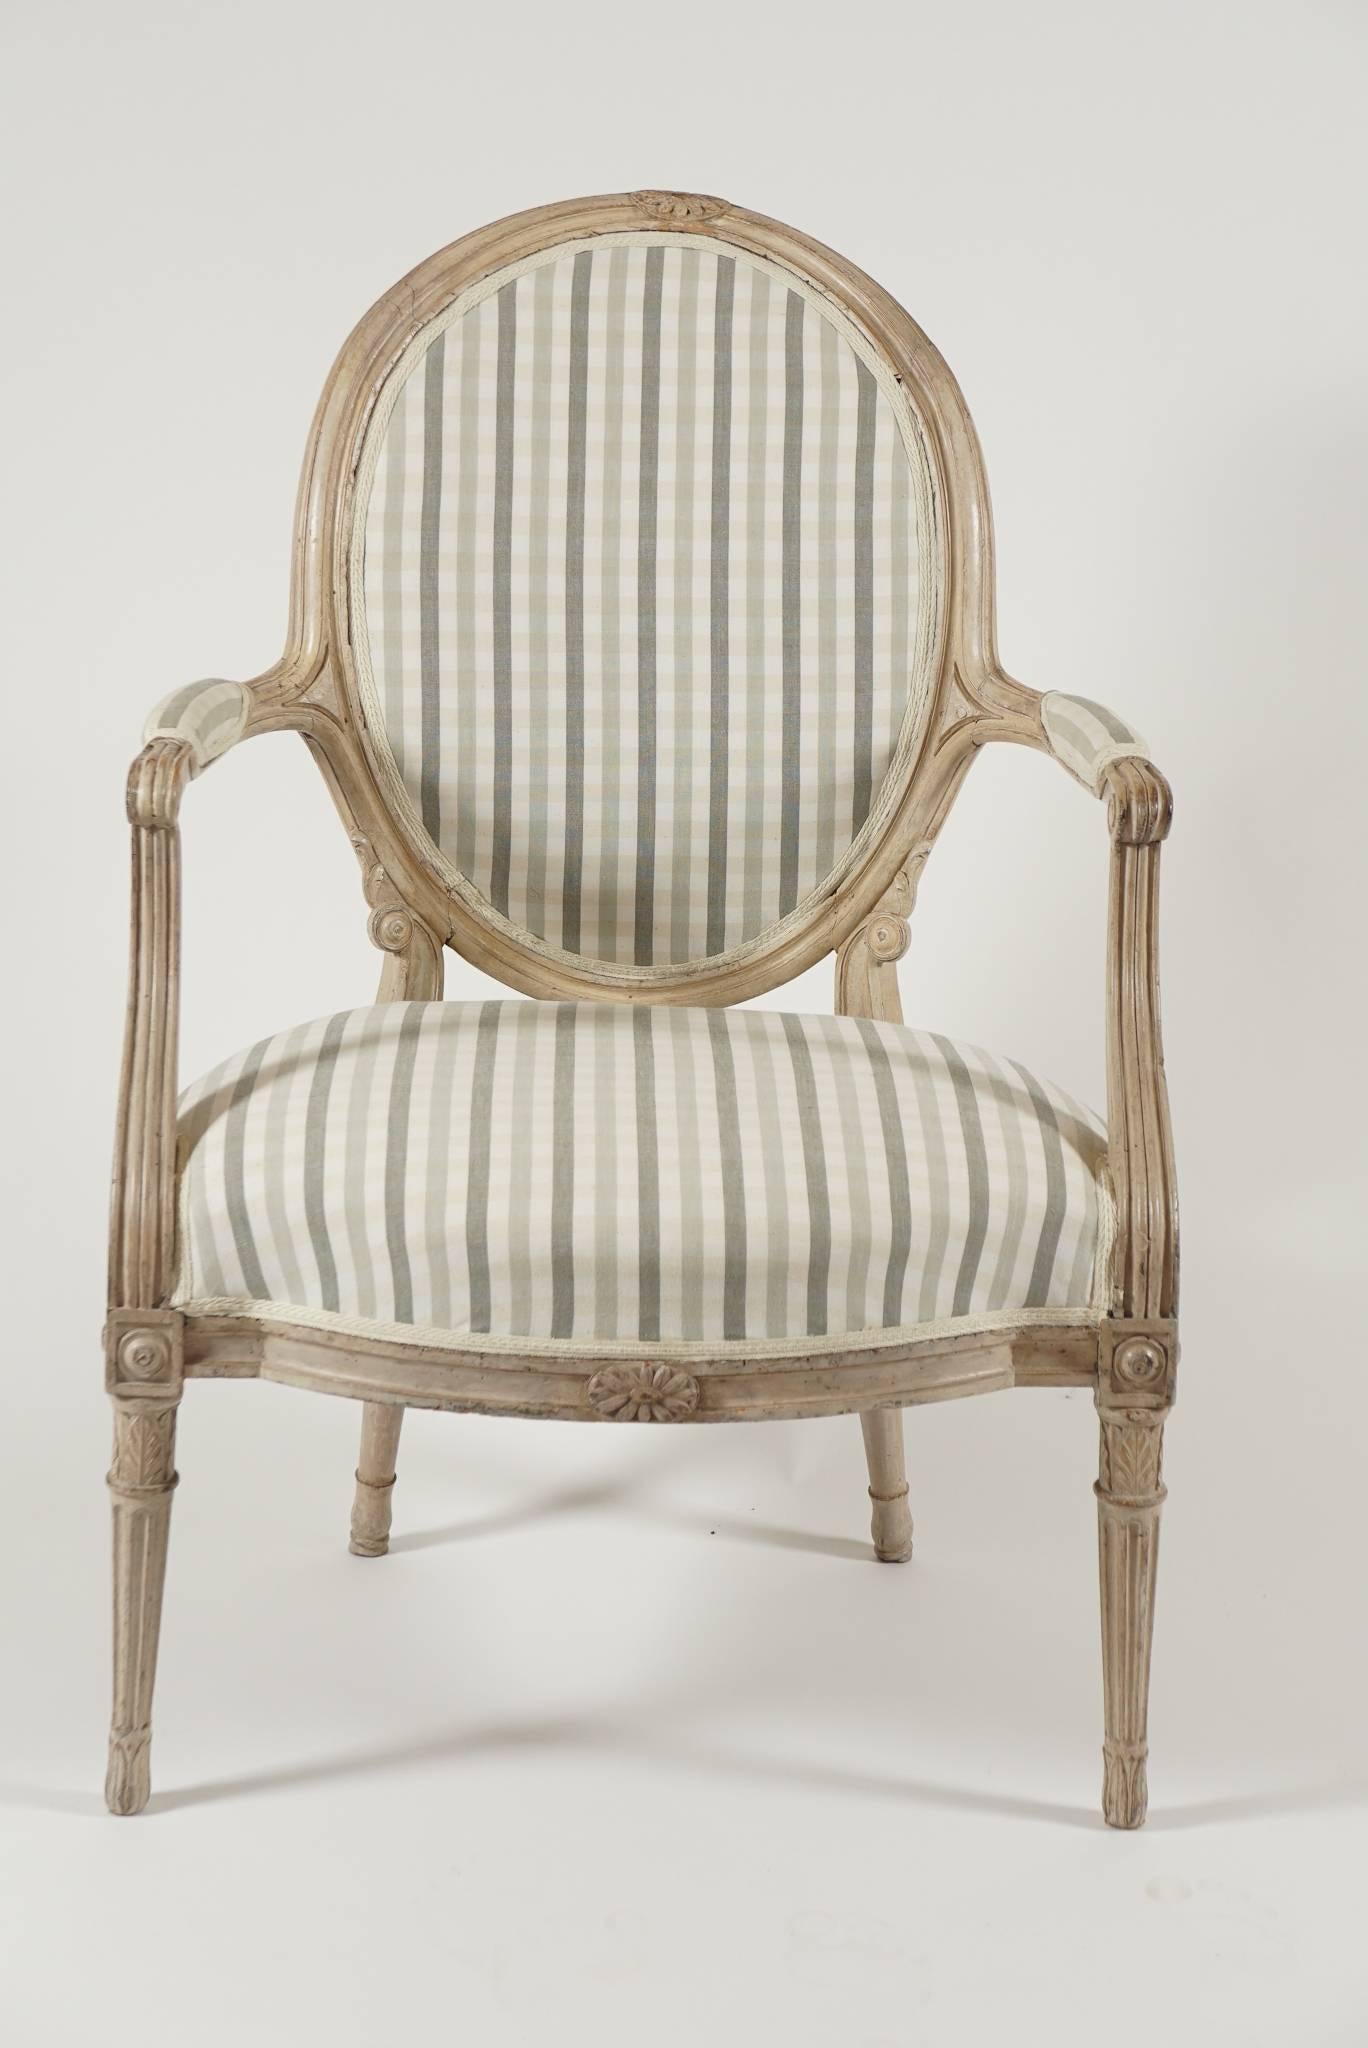 An elegant circa 1790, Danish, Louis XVI style fauteuil with carved wood frame having exceptional detail and original painted finish with upholstered oval-shaped backrest, armrests, and seat.  The design of this chair references a c. 1770 chair by